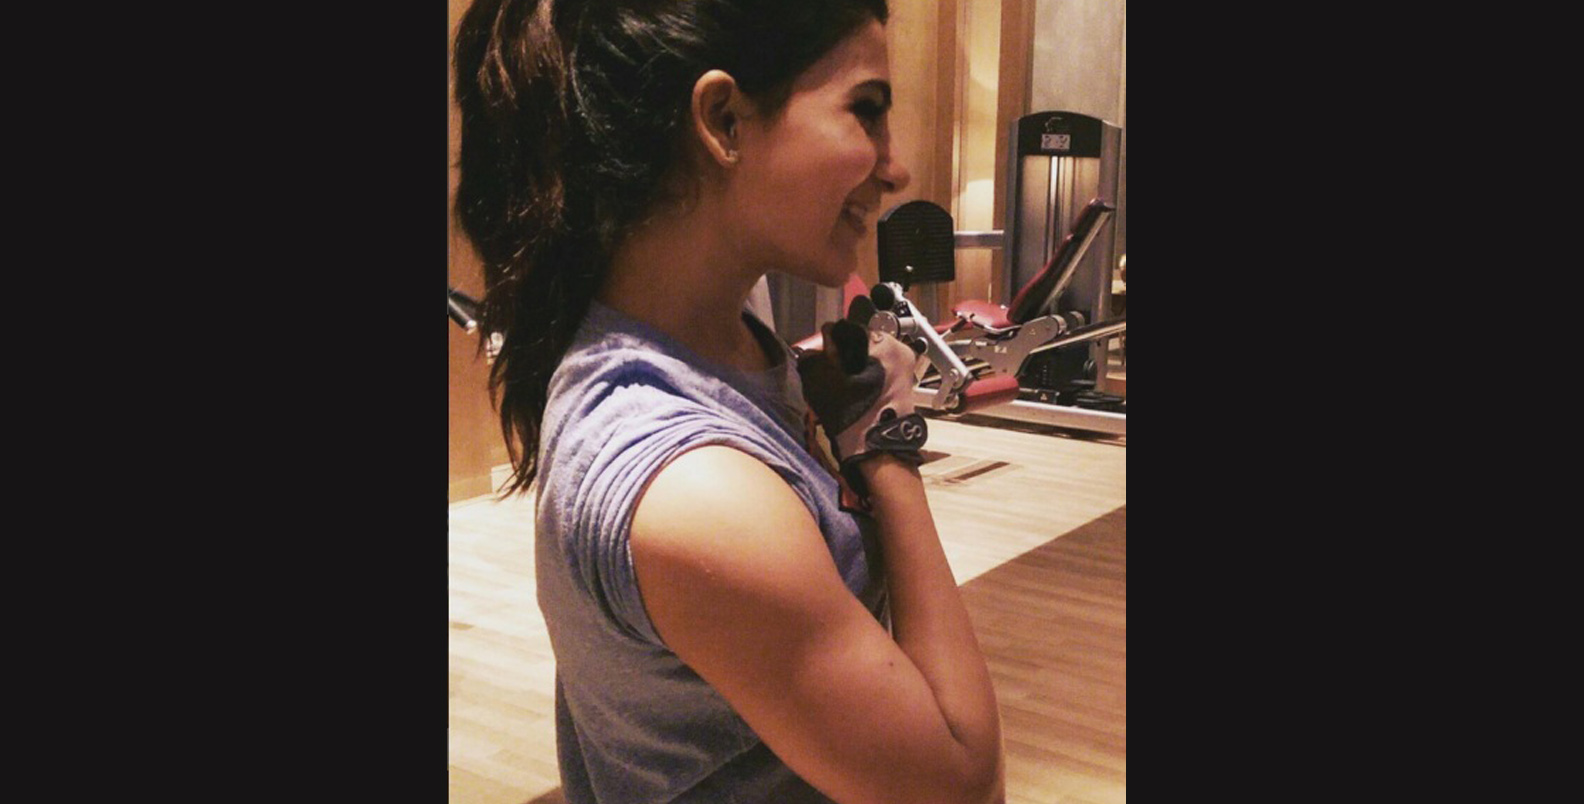 Samantha is killing it in the gym! Look at those toned arms!!!.jpg 2